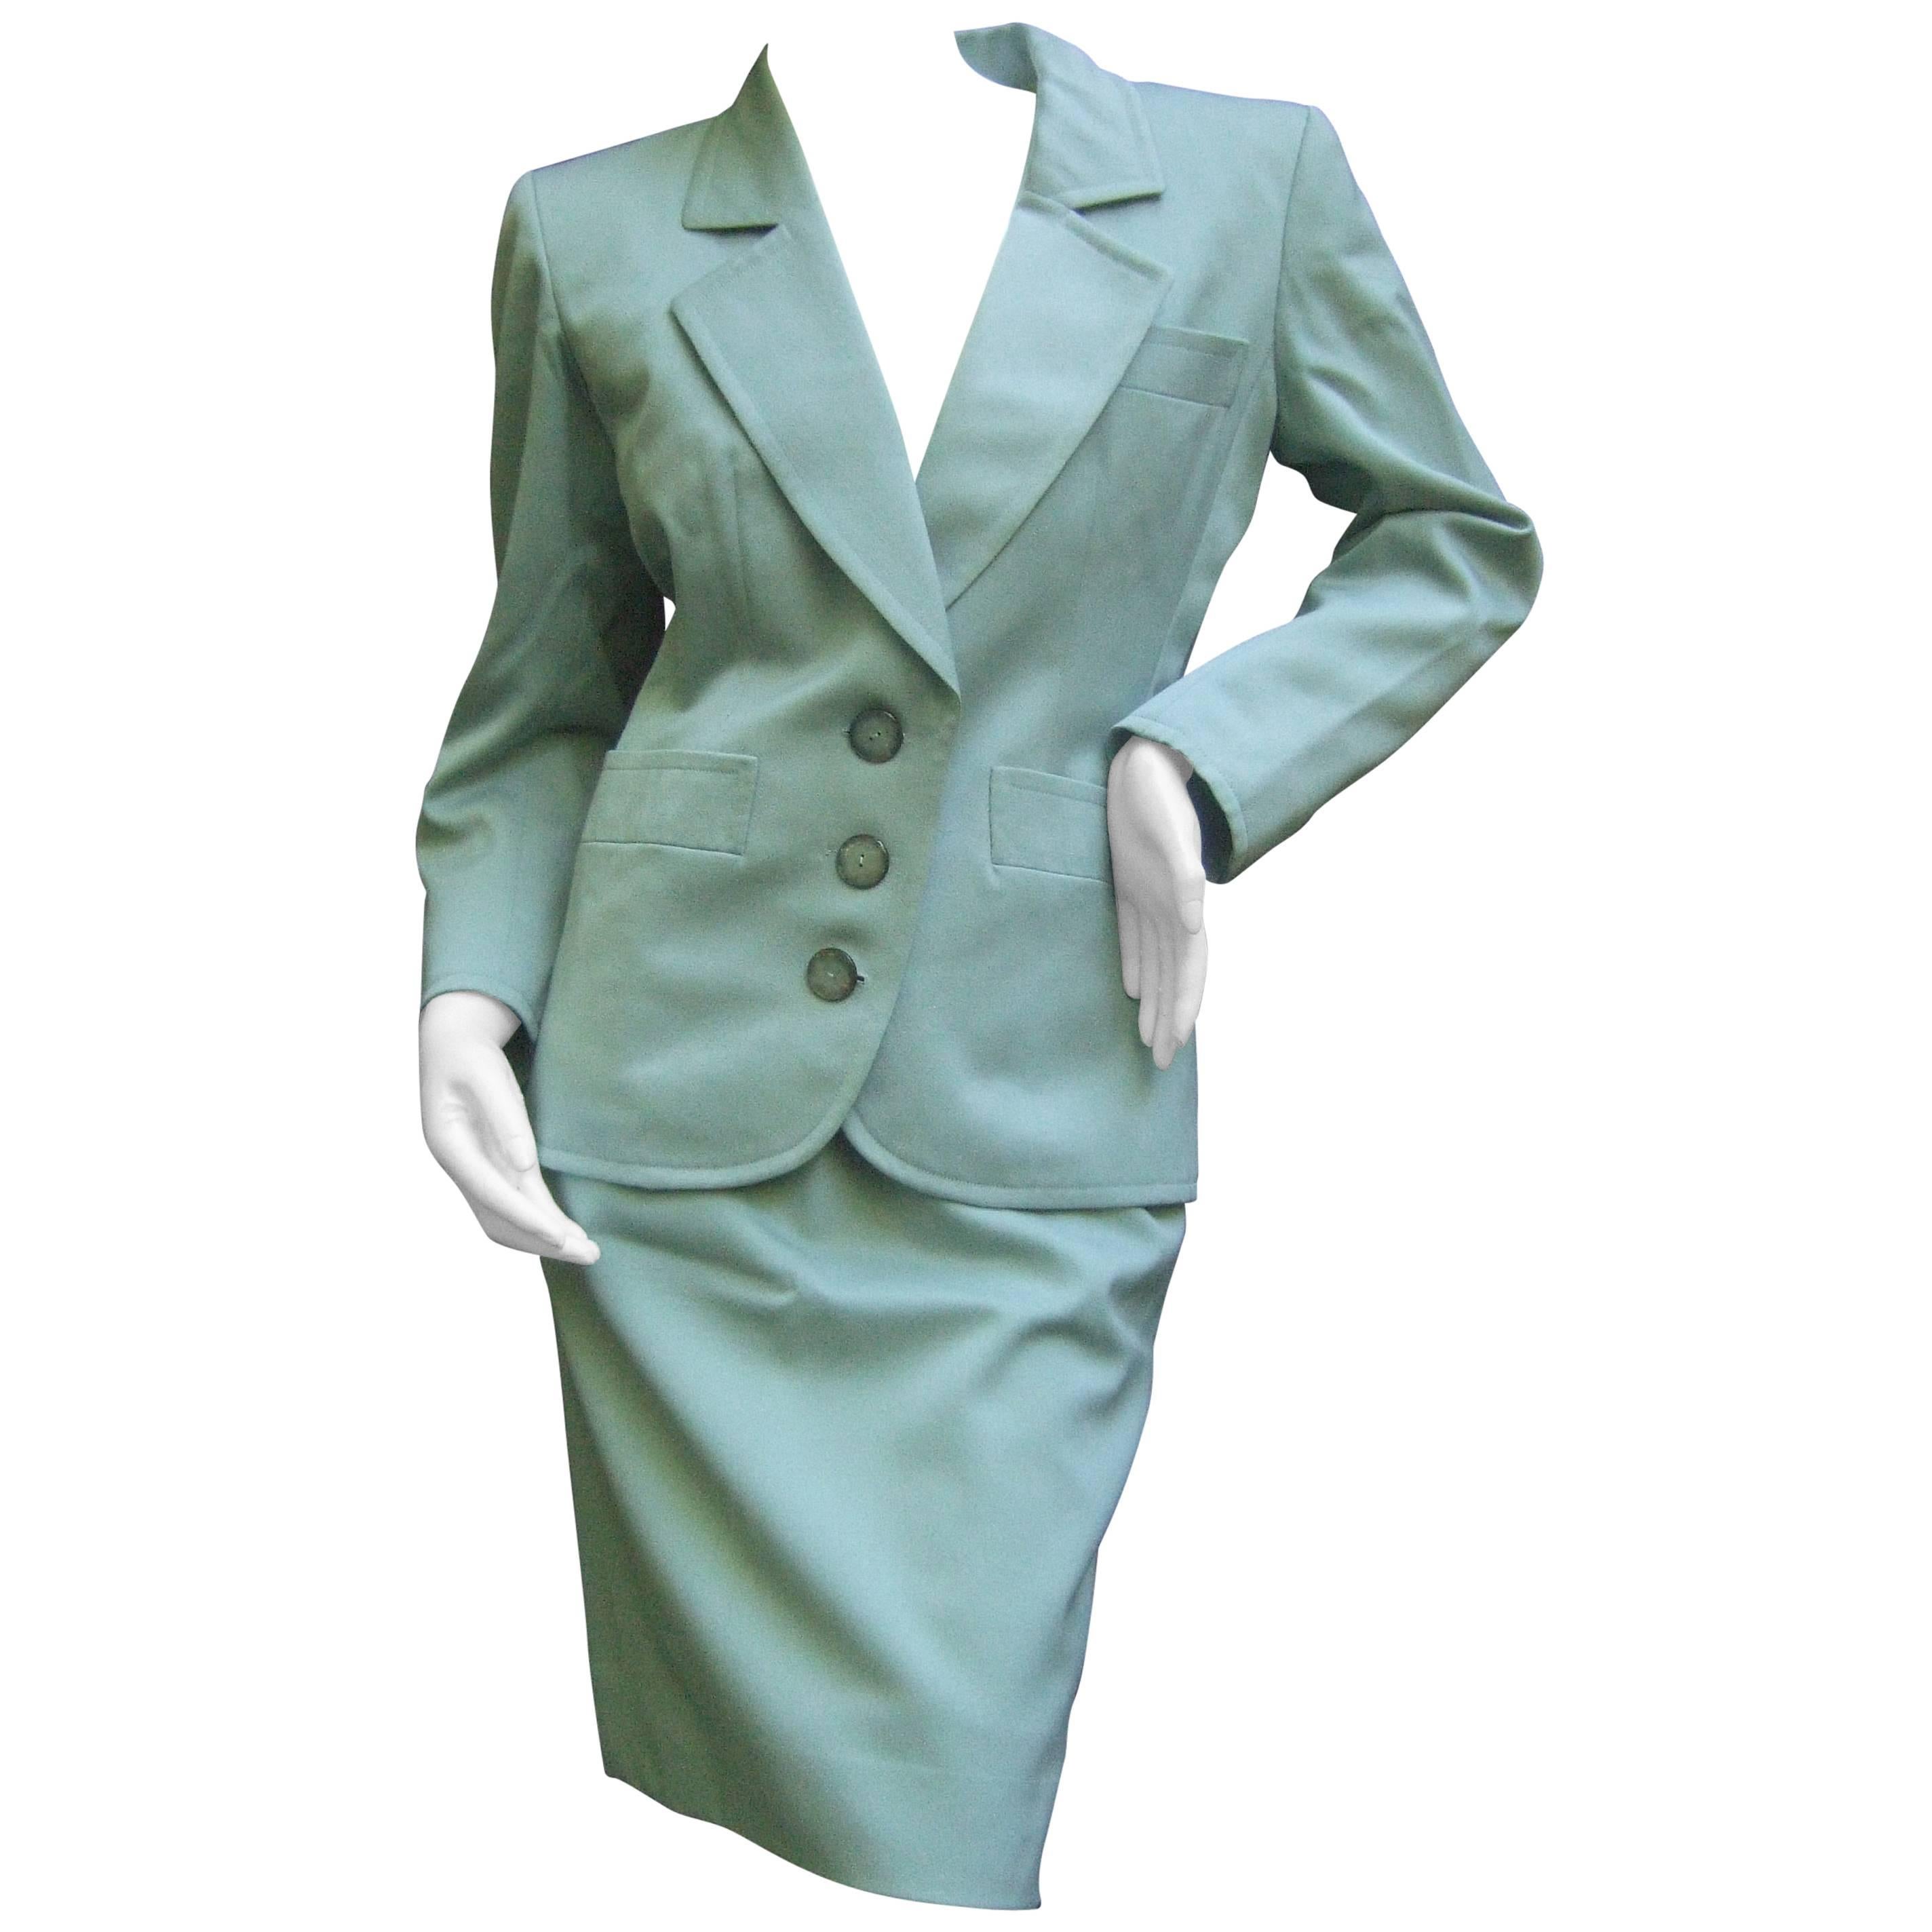 Yves Saint Laurent Couture Sage Green Suit. 1980's Power Dressing. For Sale